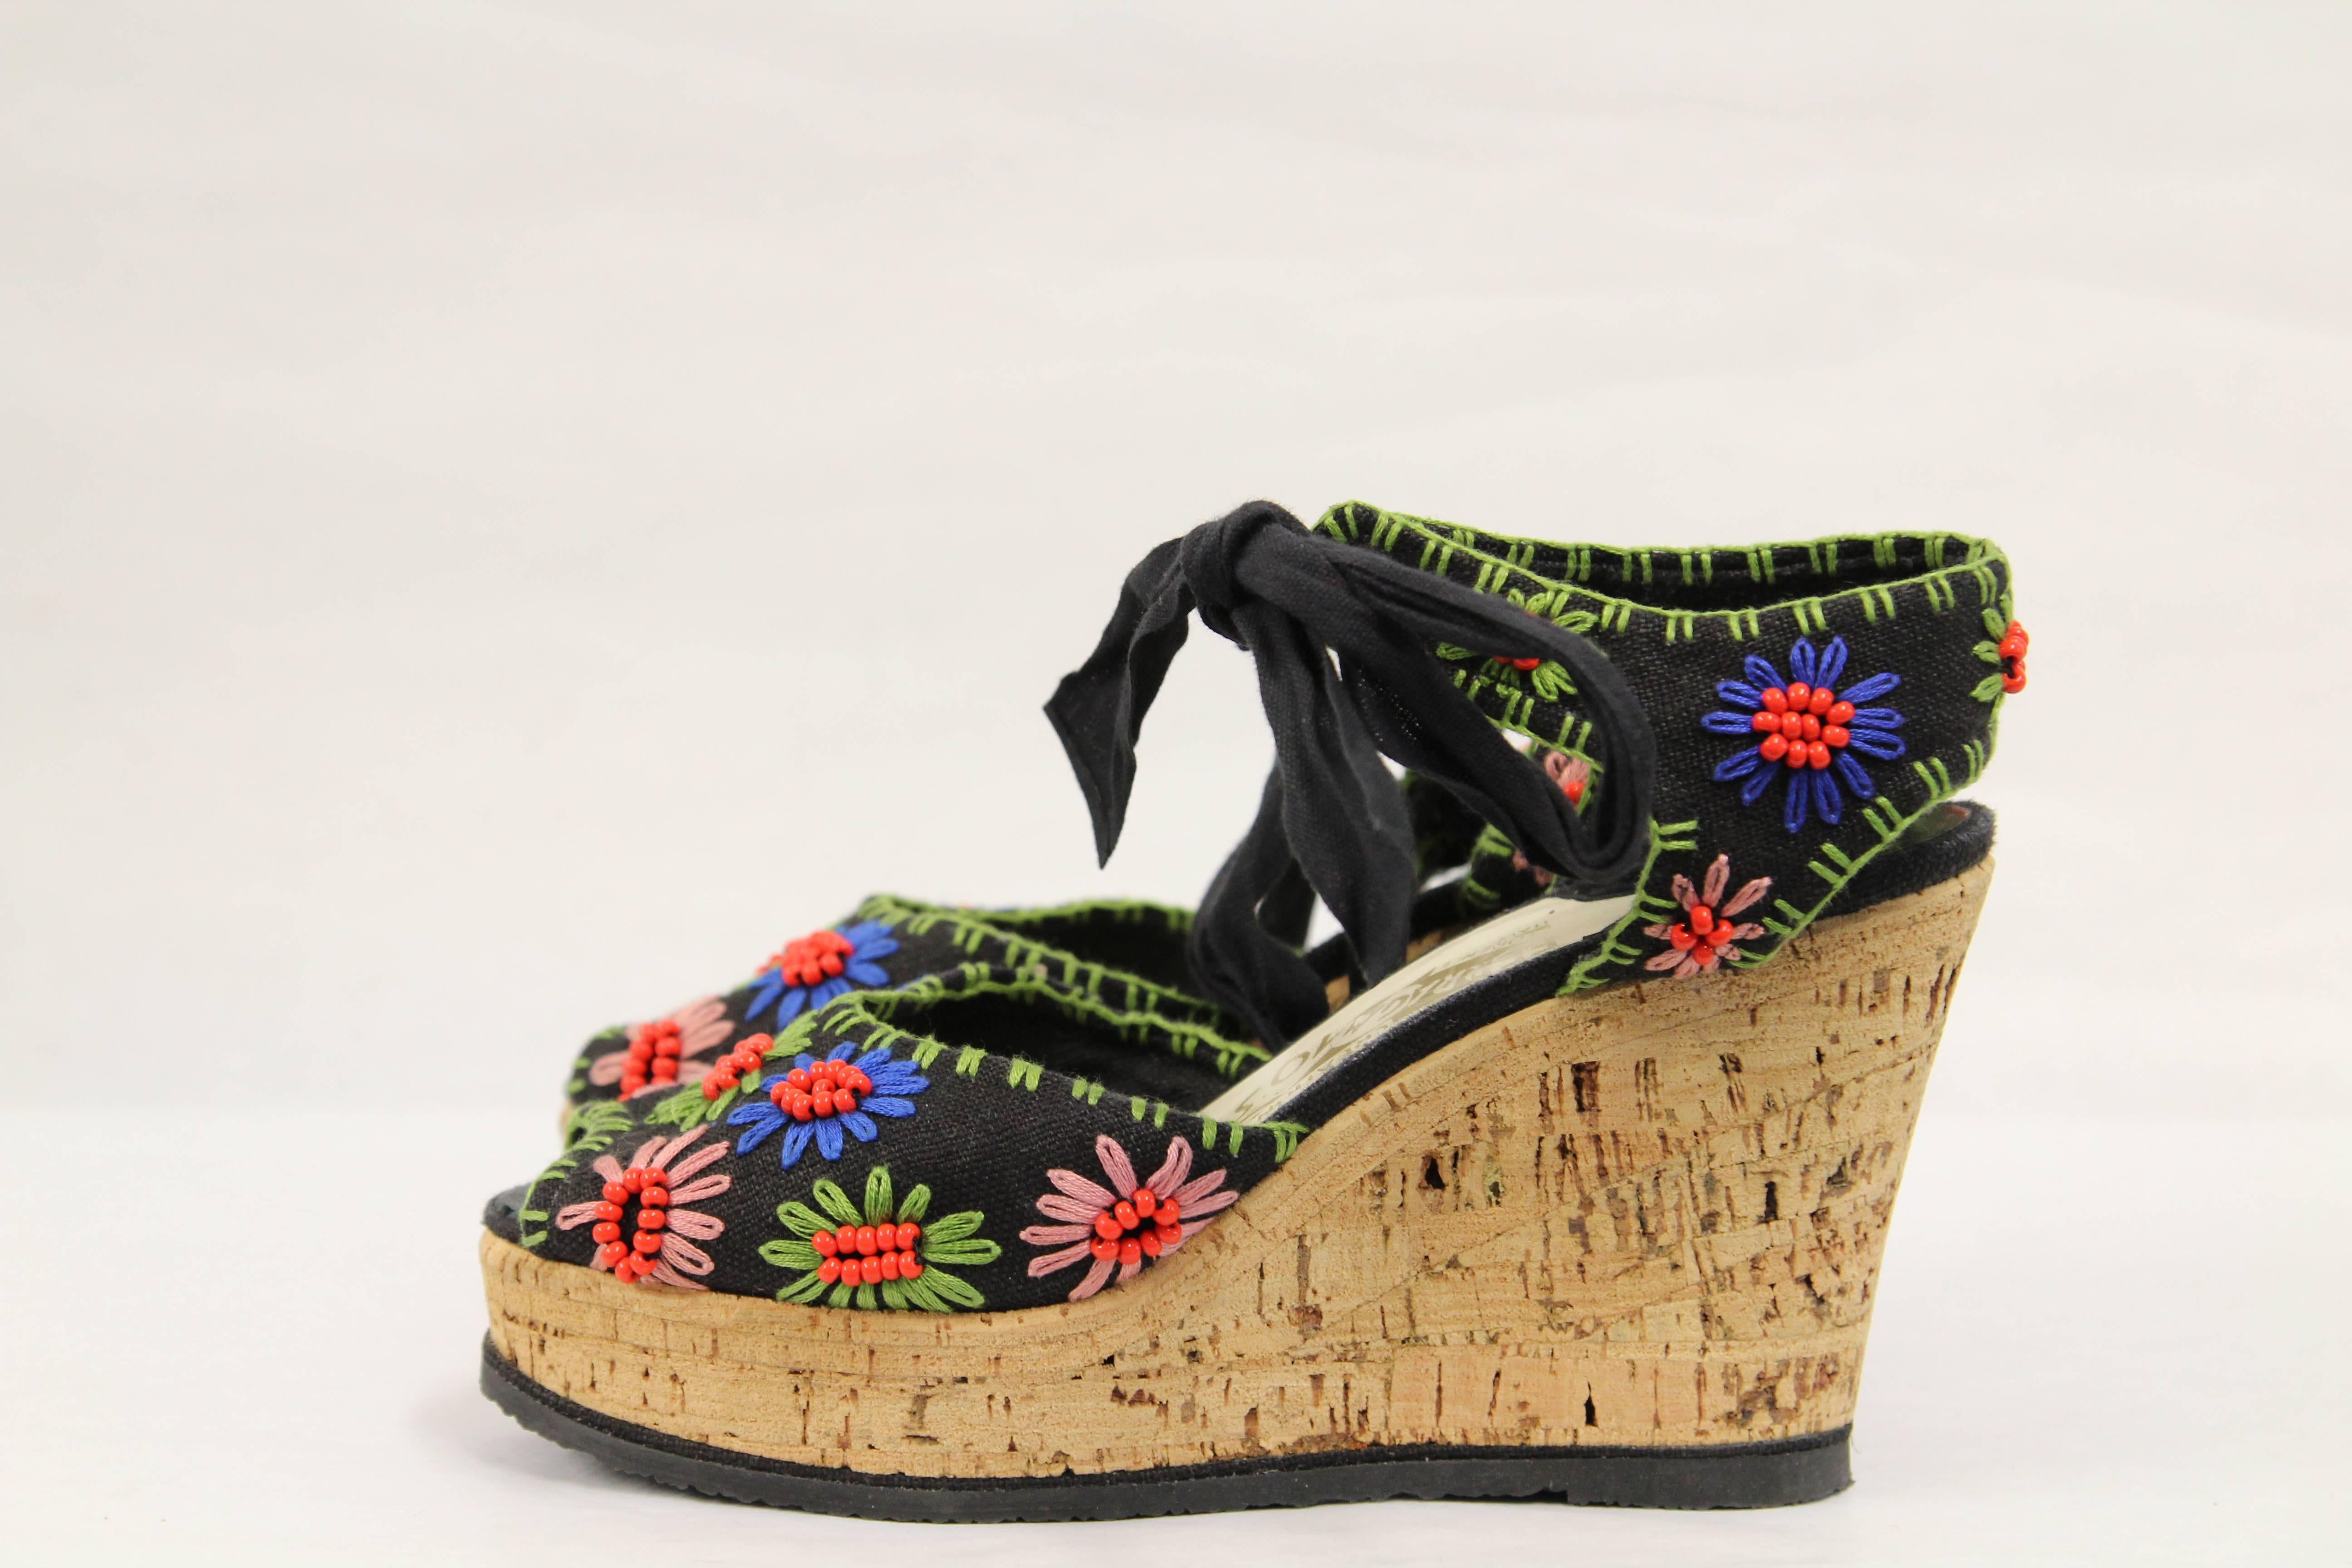 Beautiful Limited Edition embroidered wedges sandals by Salvatore Ferragamo. The item has never been worn, it is though in perfect conditions. The wedge measures 9 cm.
It dates back to 1970s. 
Size 37 EU: the item fits half size smaller.